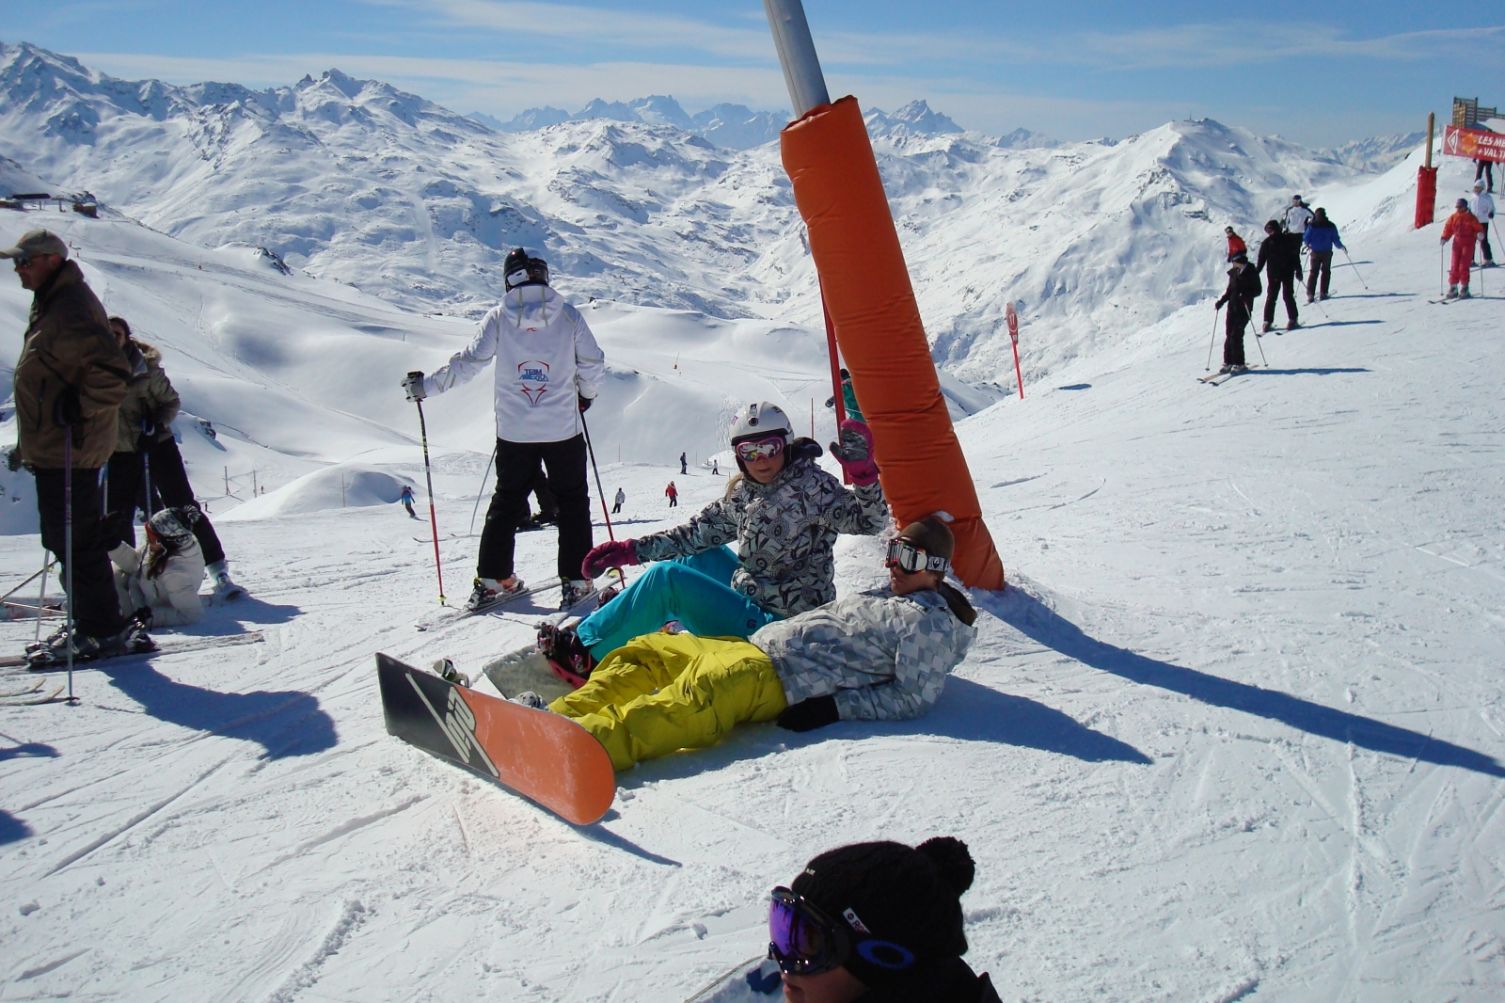 An Under 35s skier enjoying some downtime